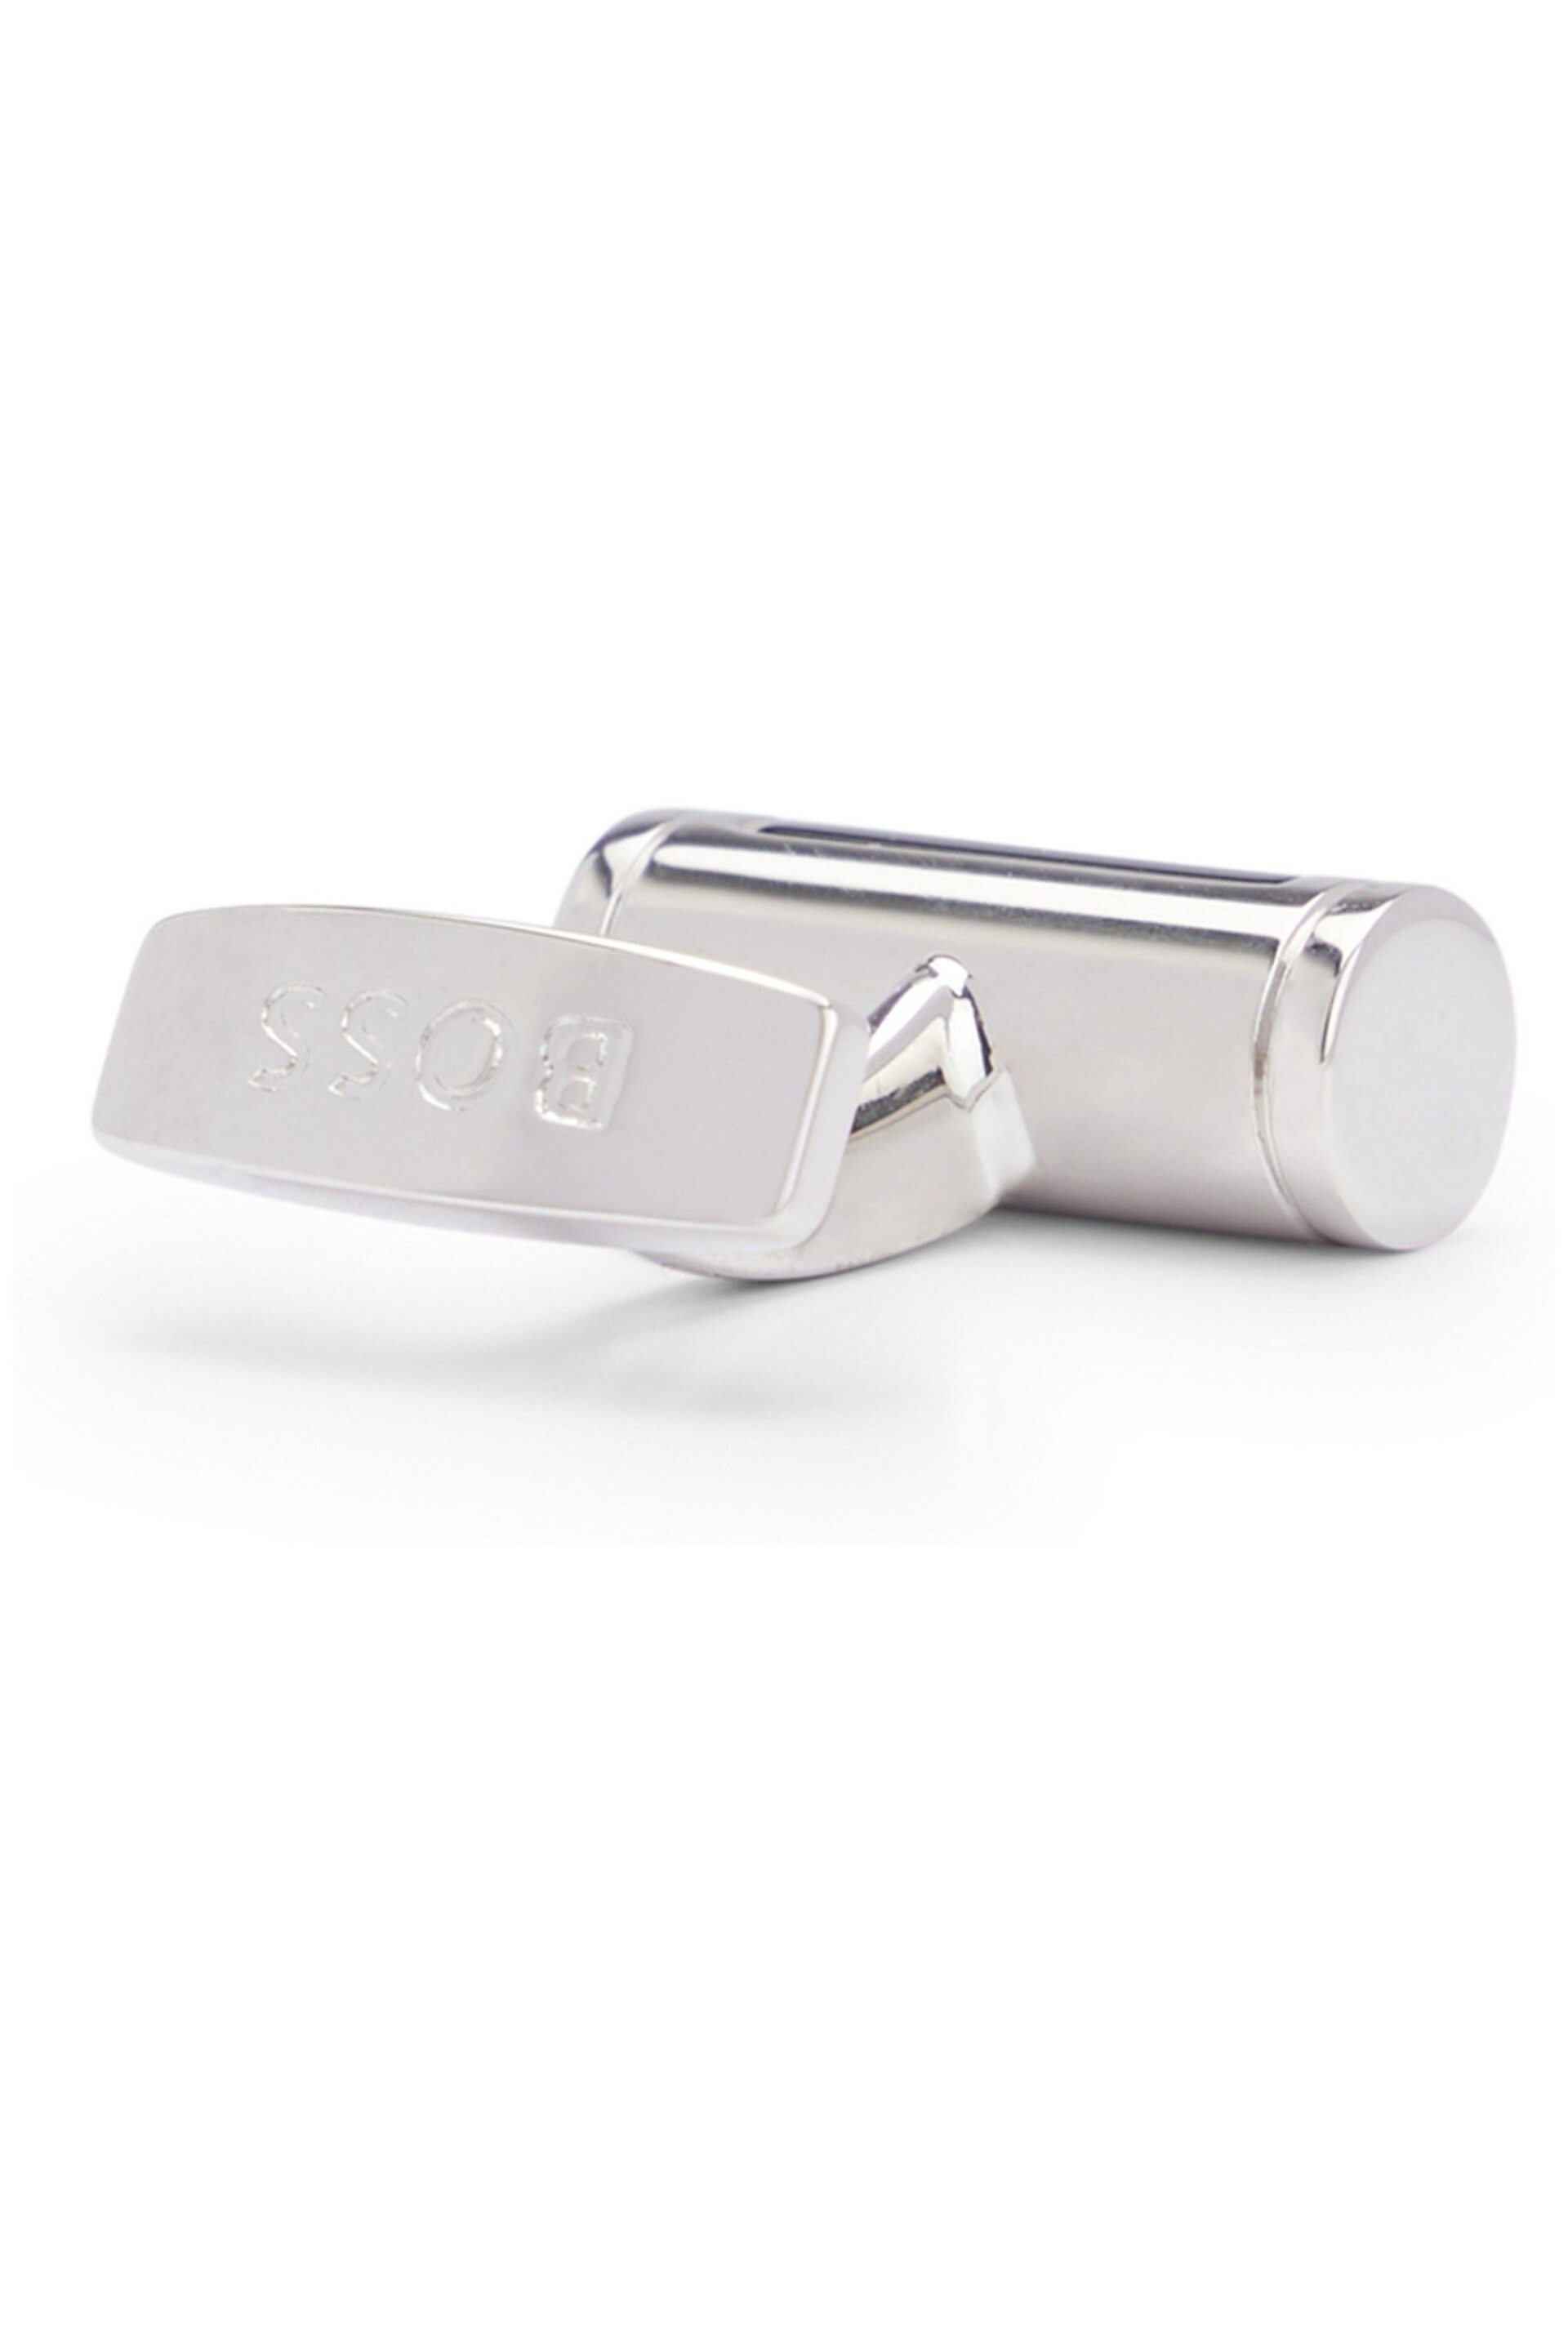 BOSS Black Cylindrical Cufflinks With Enamel Insert and Engraved Logo - Image 2 of 3